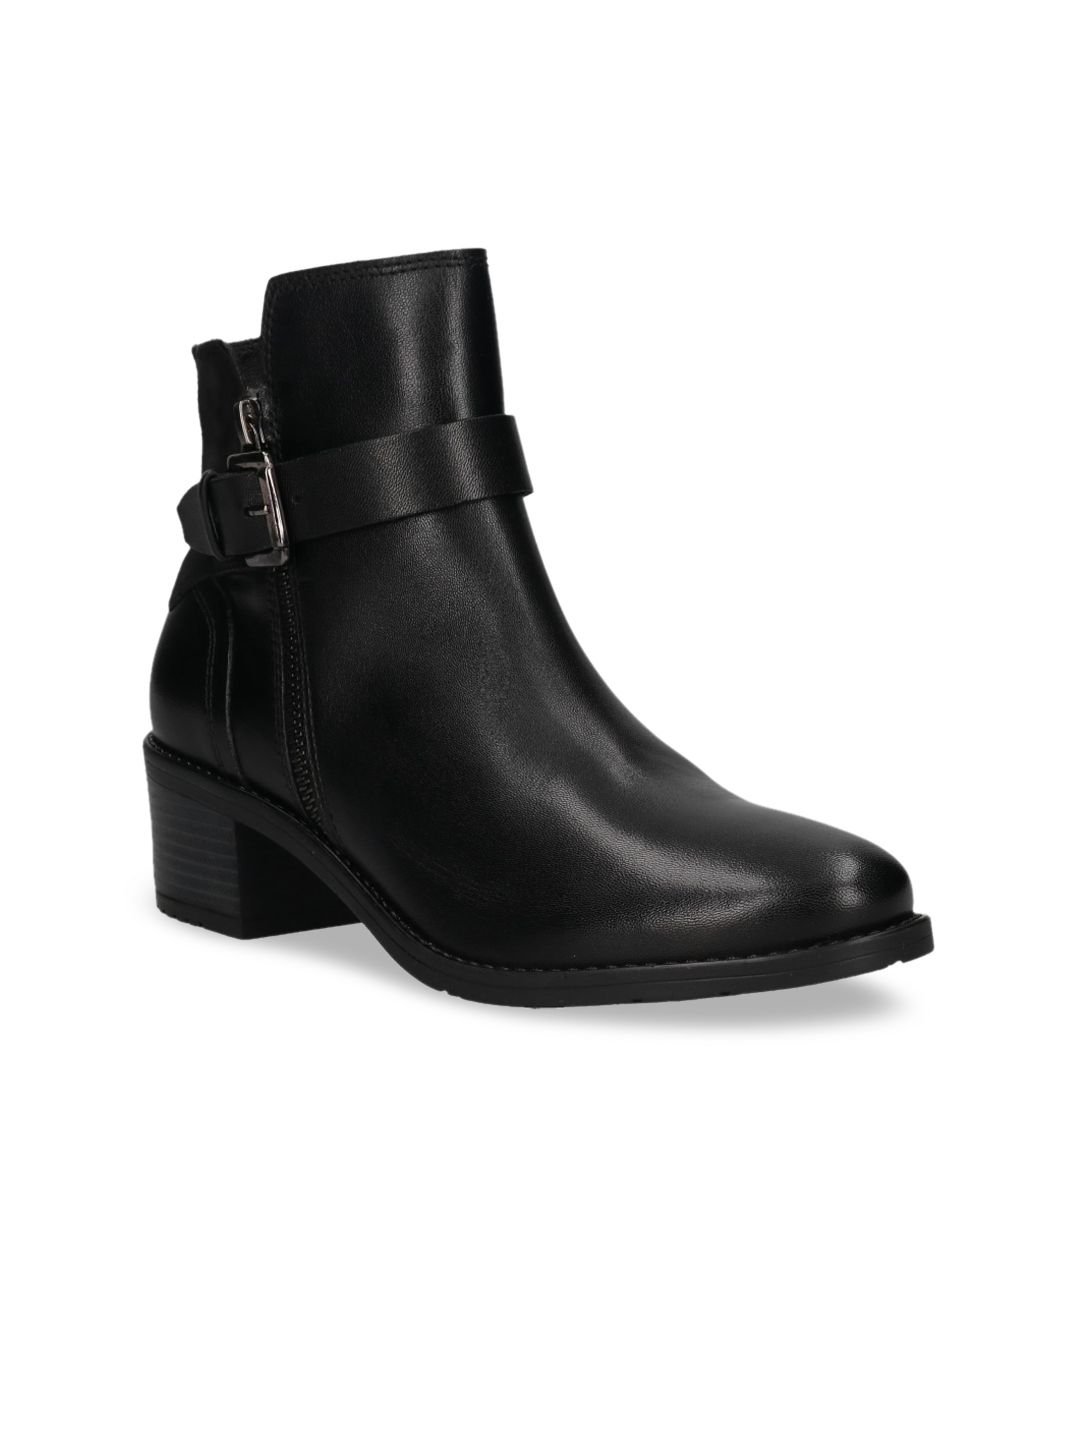 Bugatti Black Solid High-Top Leather Block Heeled Boots with Buckles Price in India